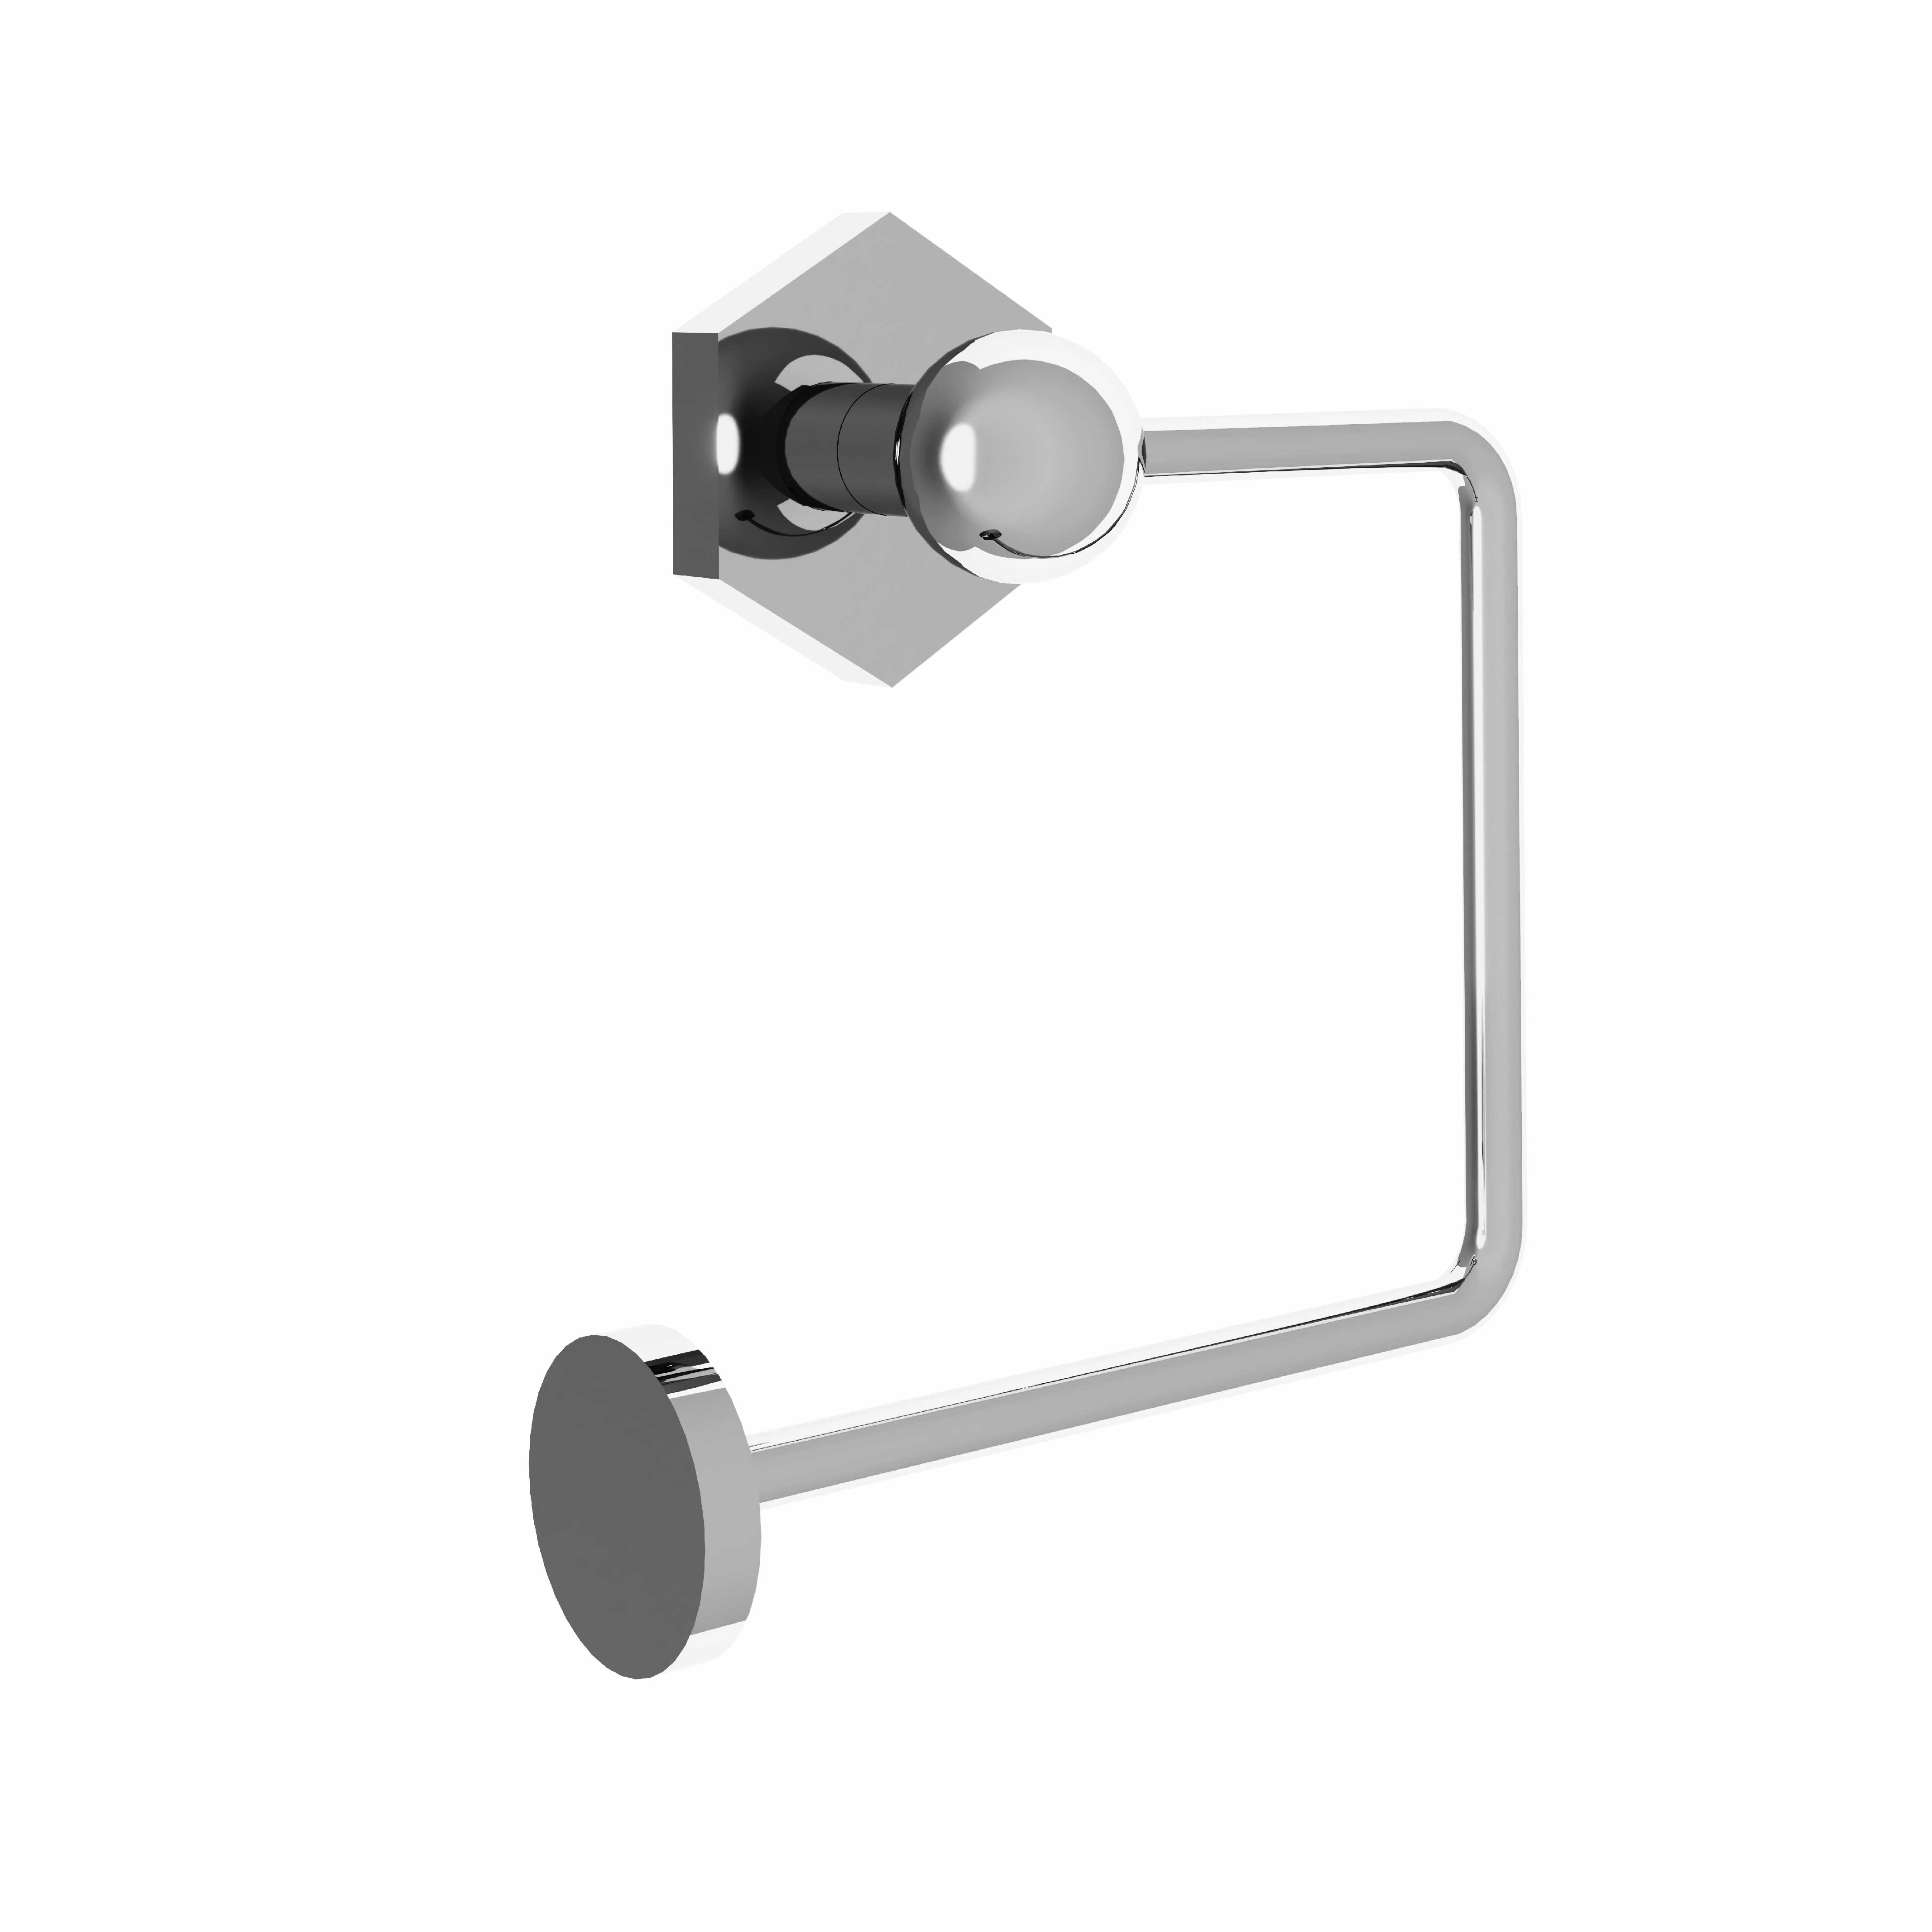 M38-504 Toilet roll holder without cover